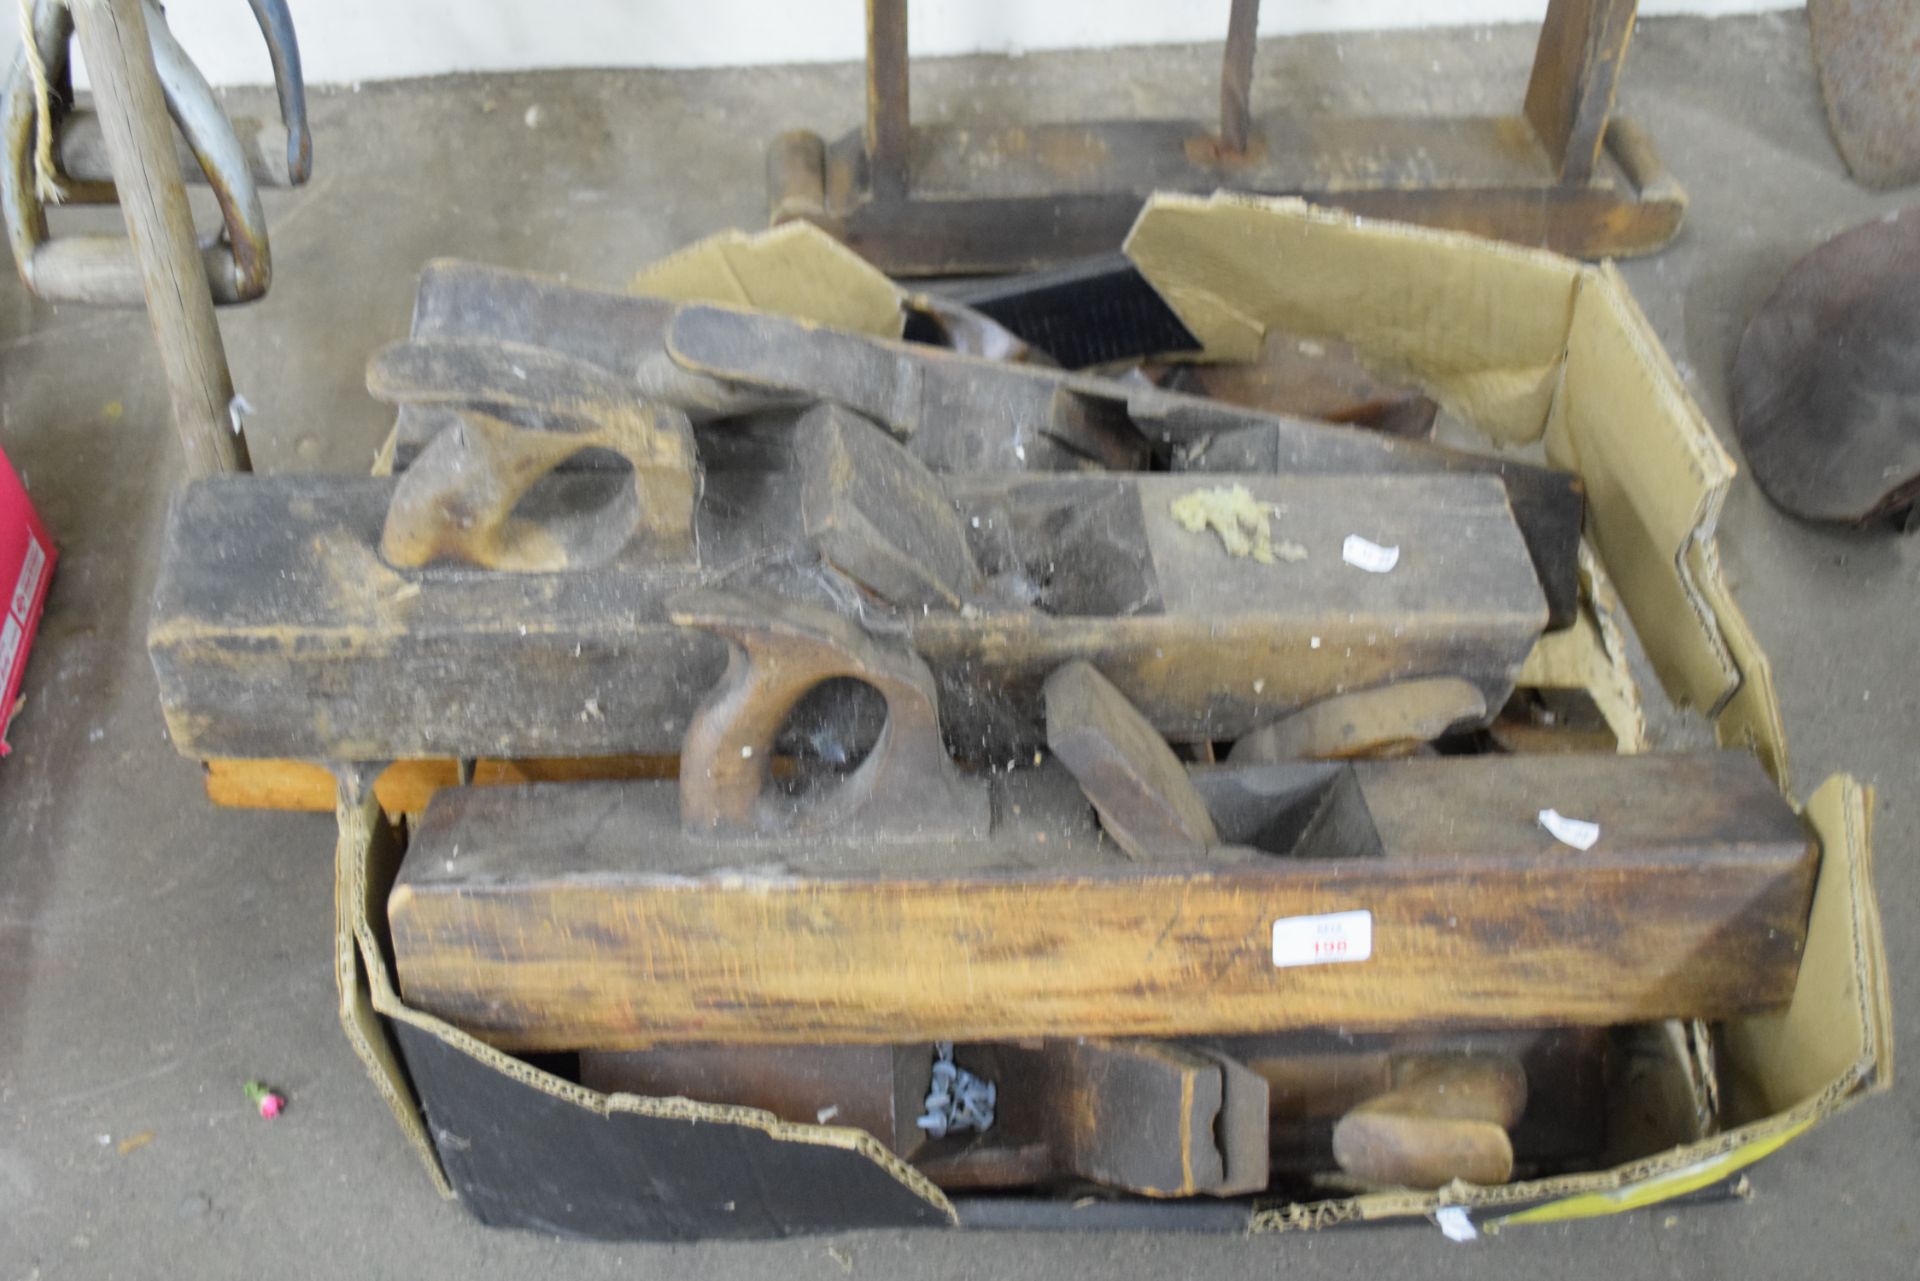 Box containing large wooden block planes